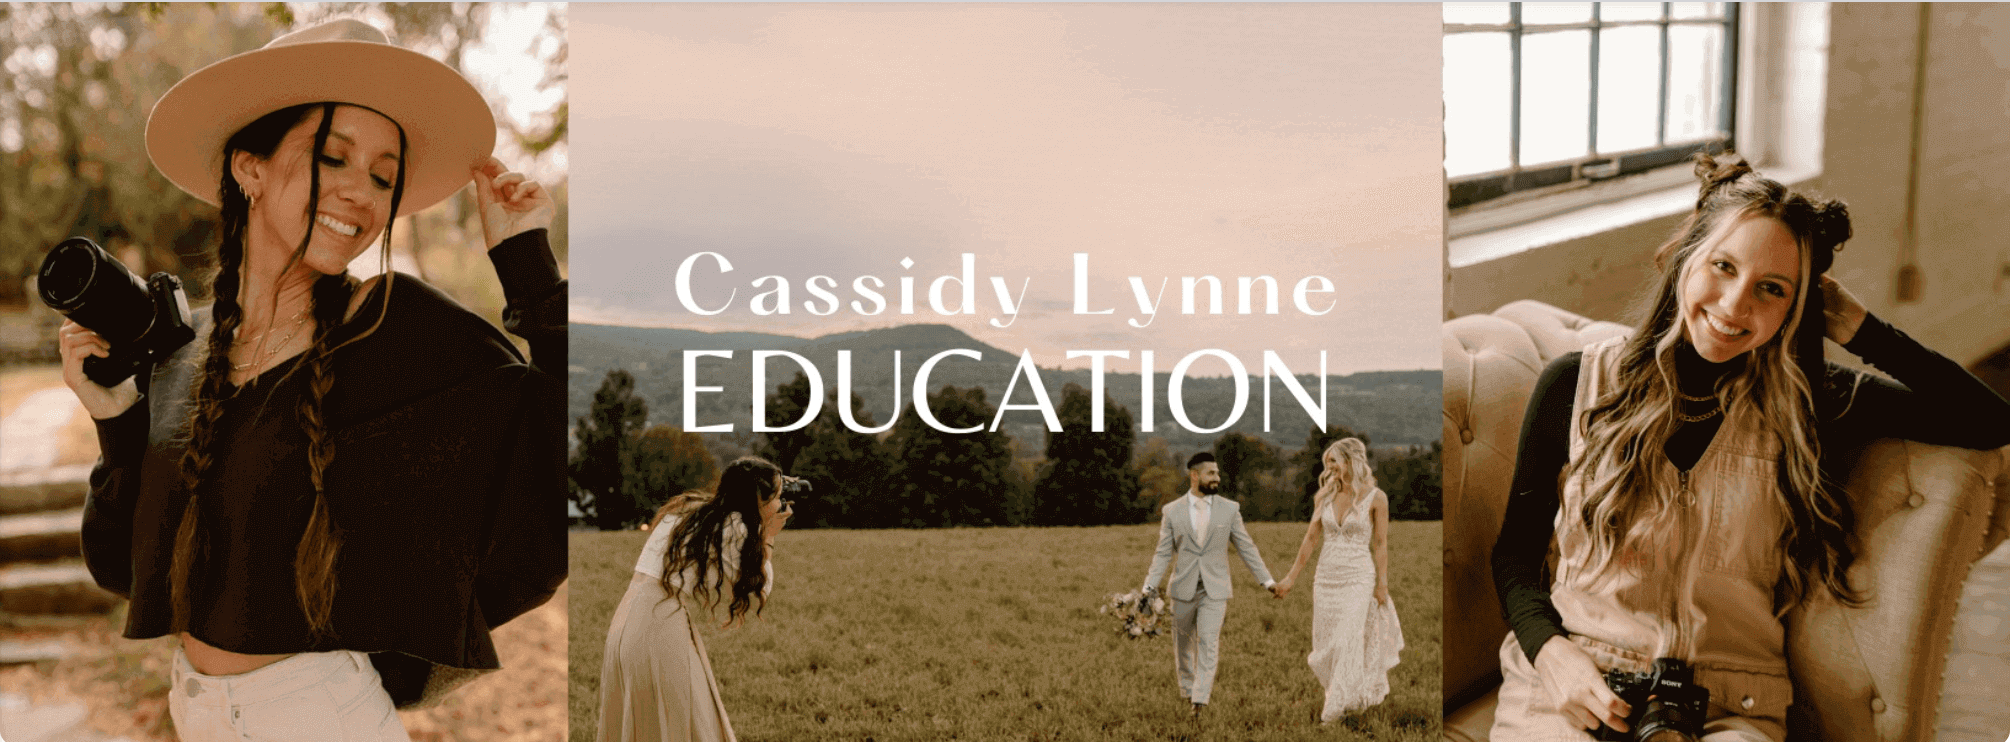 Cassidy Lynne Education photography group on Facebook